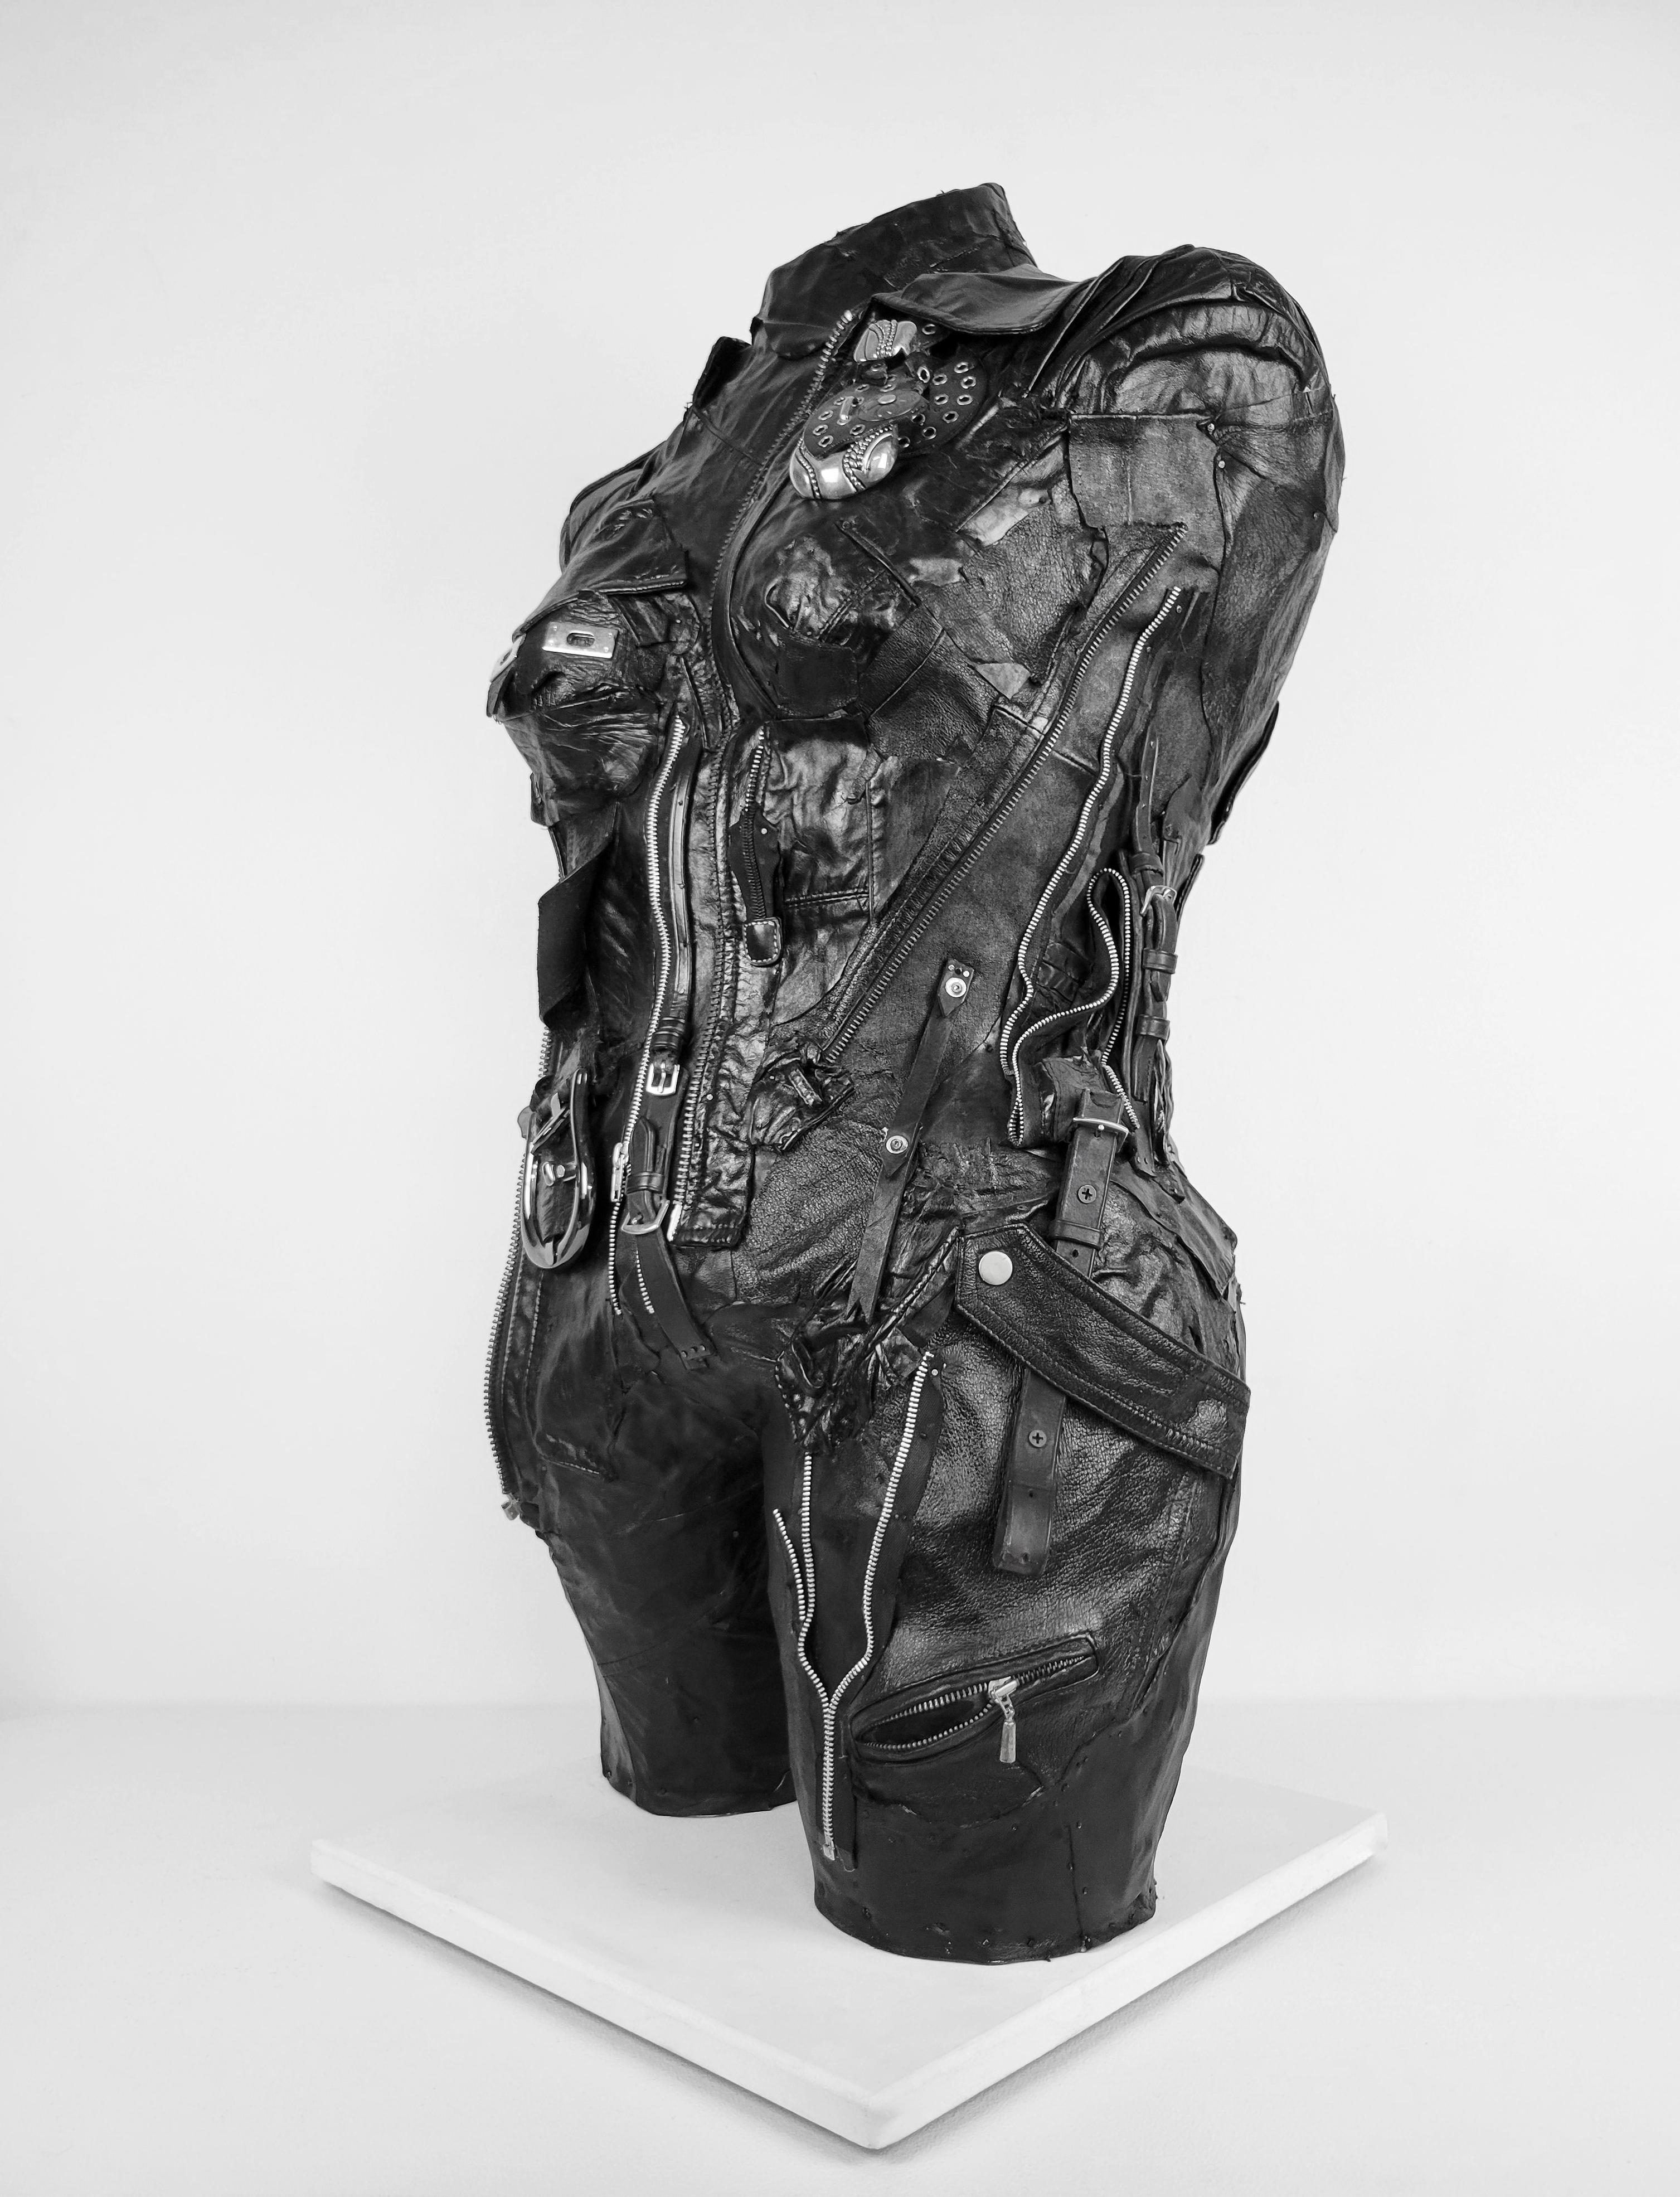 Linda Stein, On Alert 691 - Feminist Contemporary Black/Silver Leather Metal Torso Sculpture 

Starting in 2007, the artist Linda Stein began to explore gender multiplicities and diversities in her sculptural series The Fluidity of Gender.  The